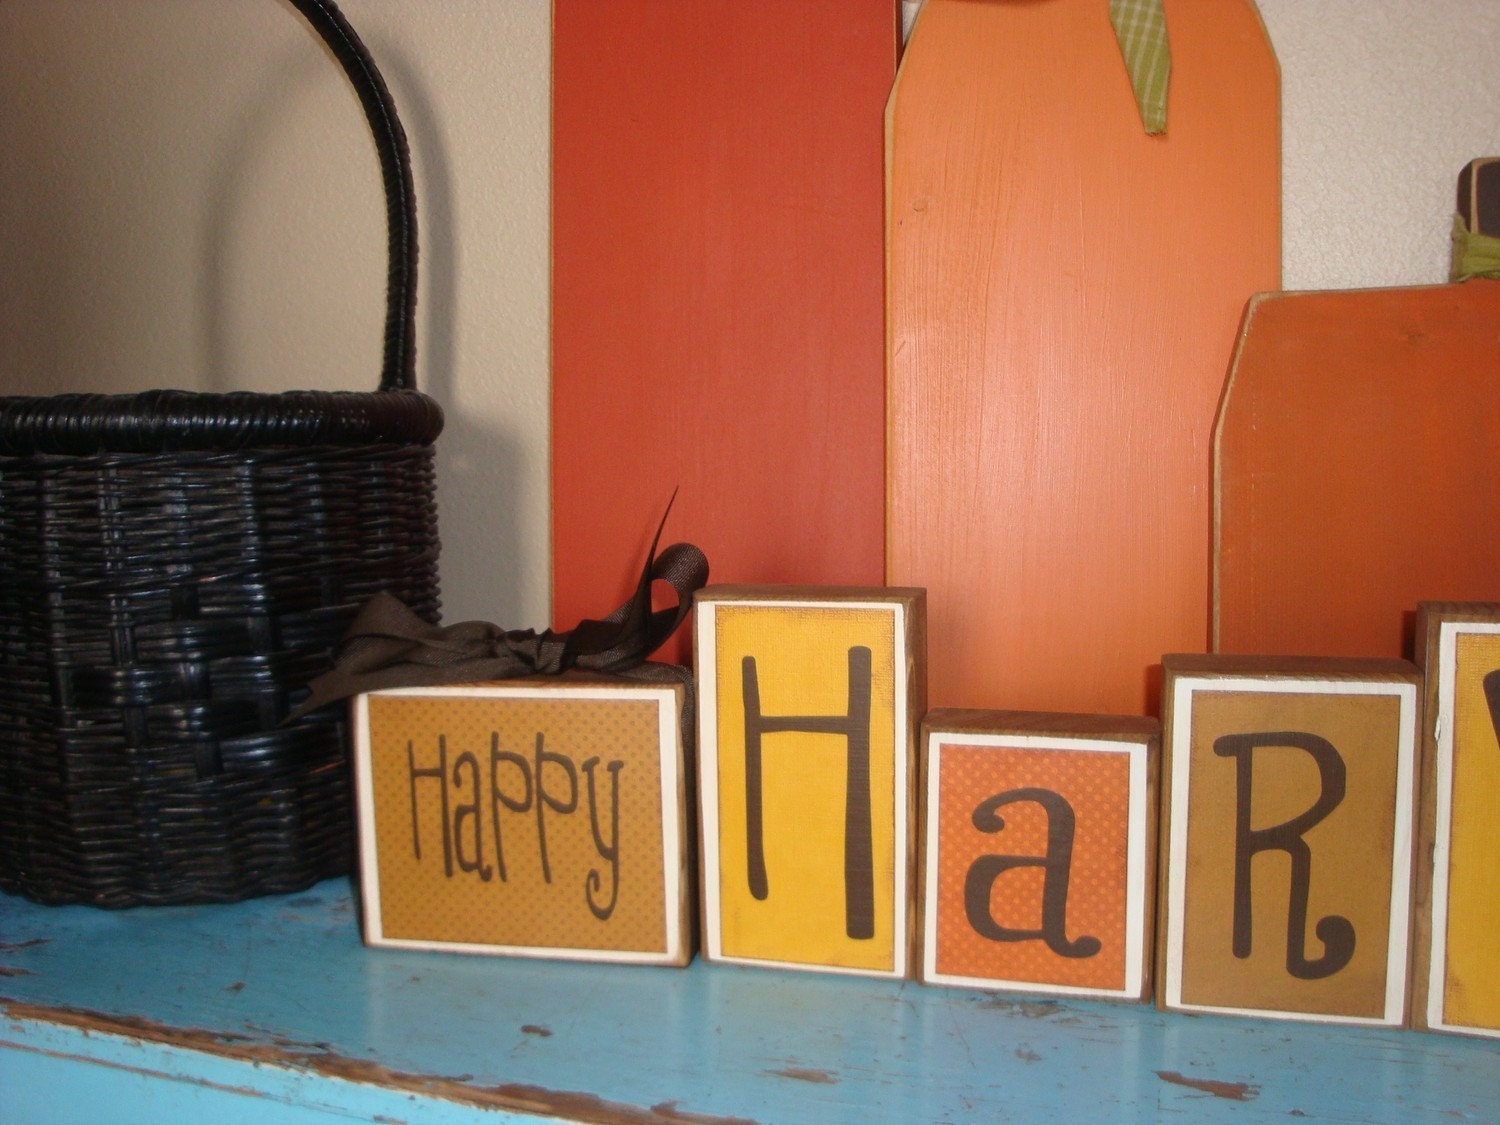 Happy HARVEST wood block set . . . check out the listing for more pictures of this super cute block set